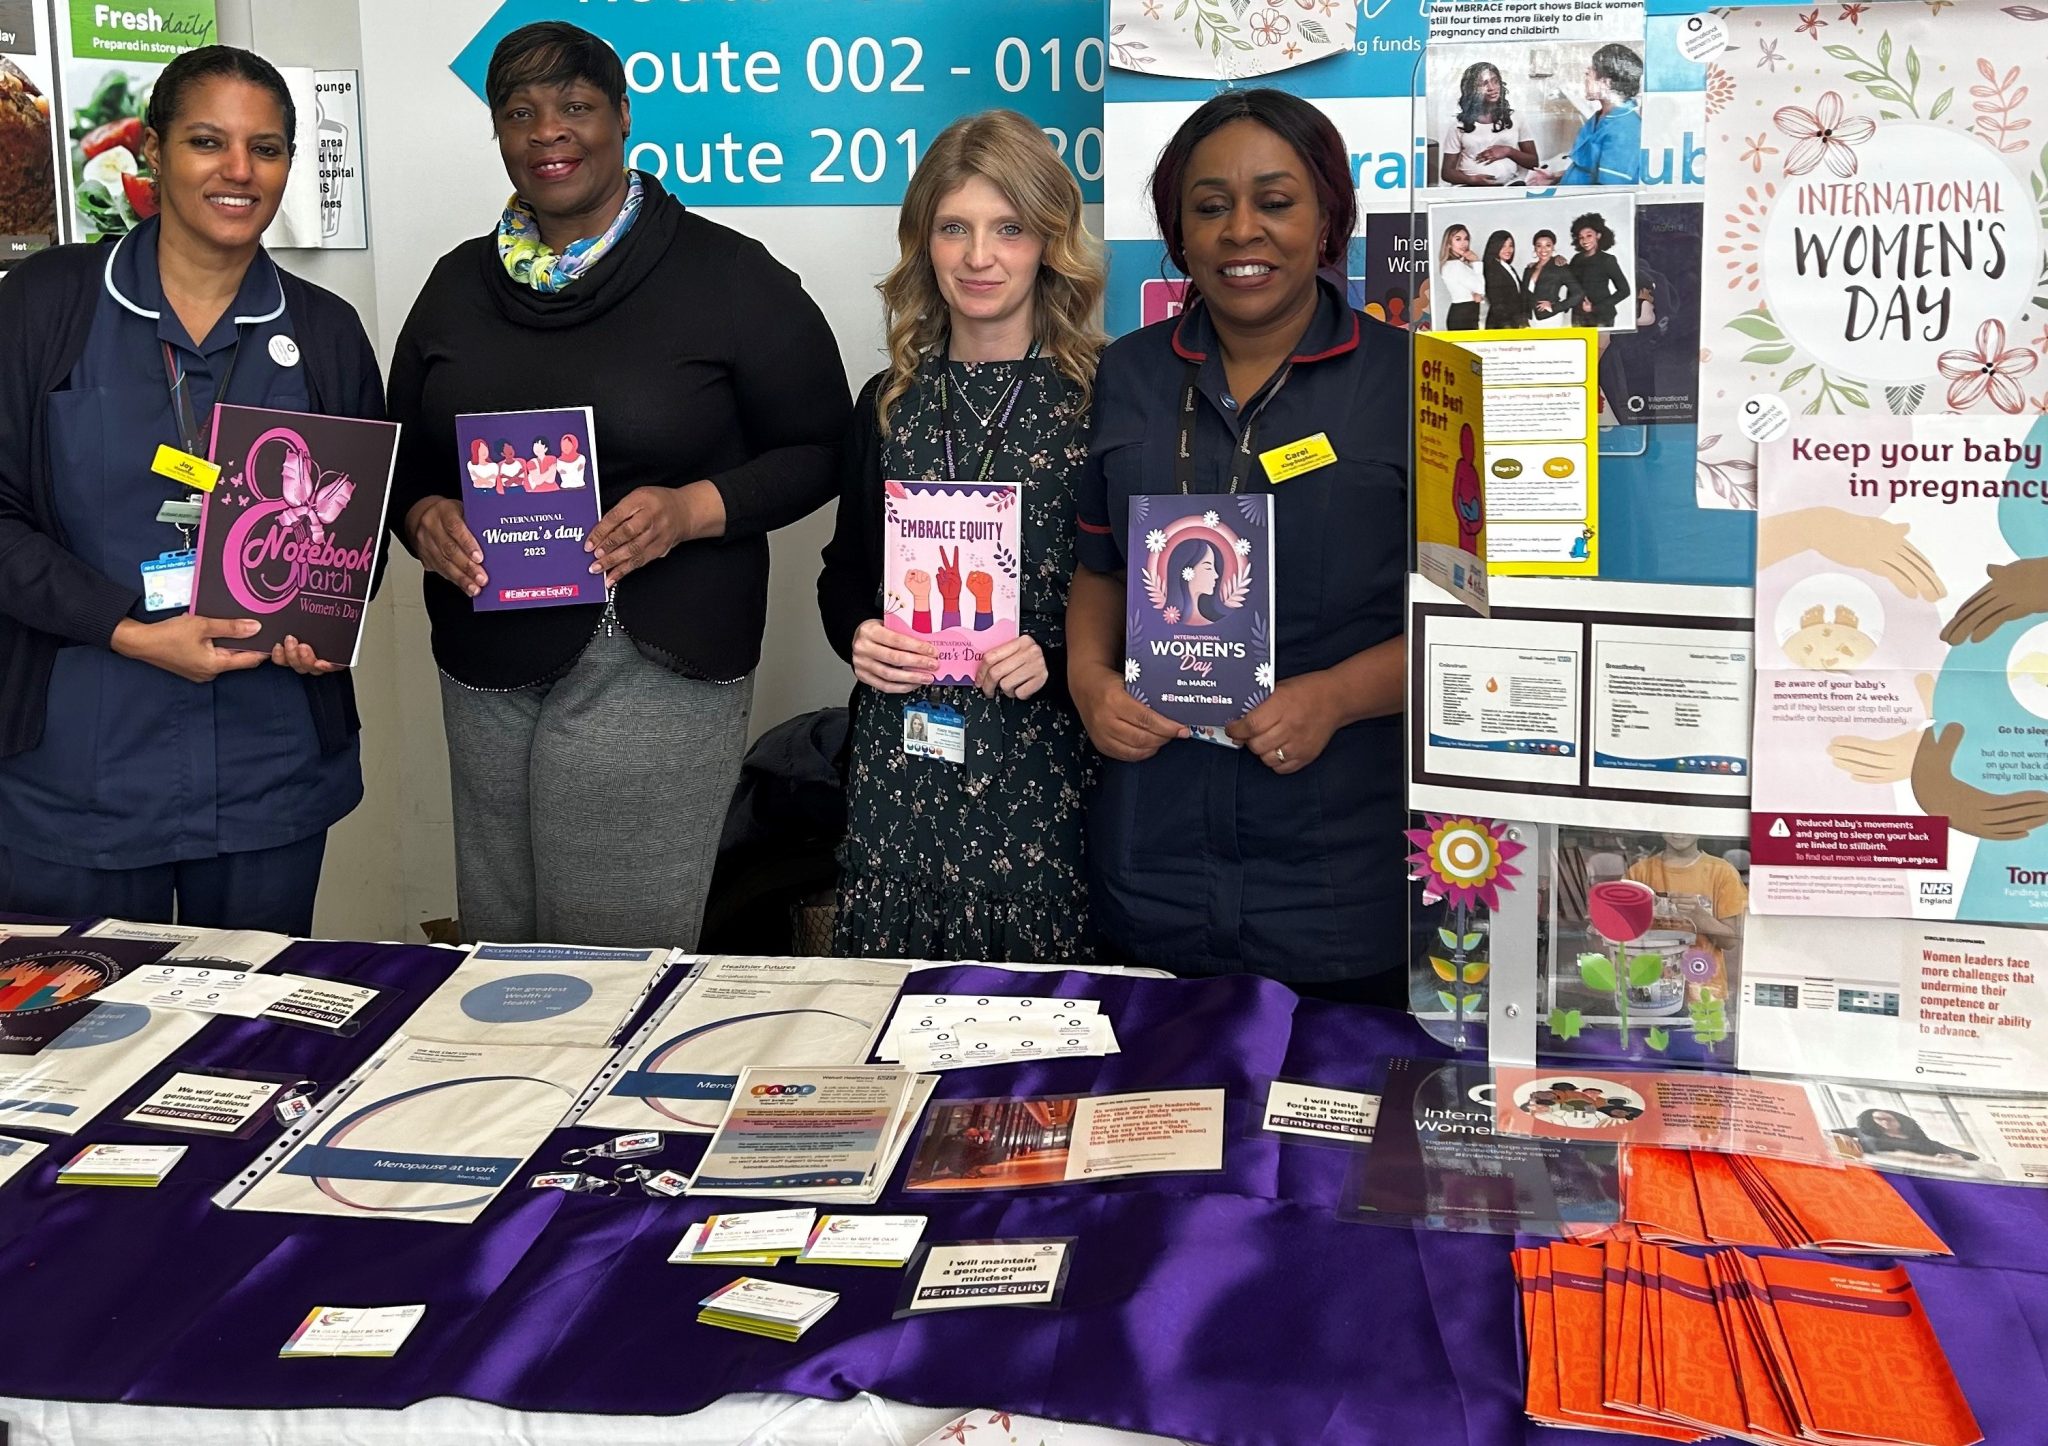 Staff in Walsall hosted an International Women's Day stand